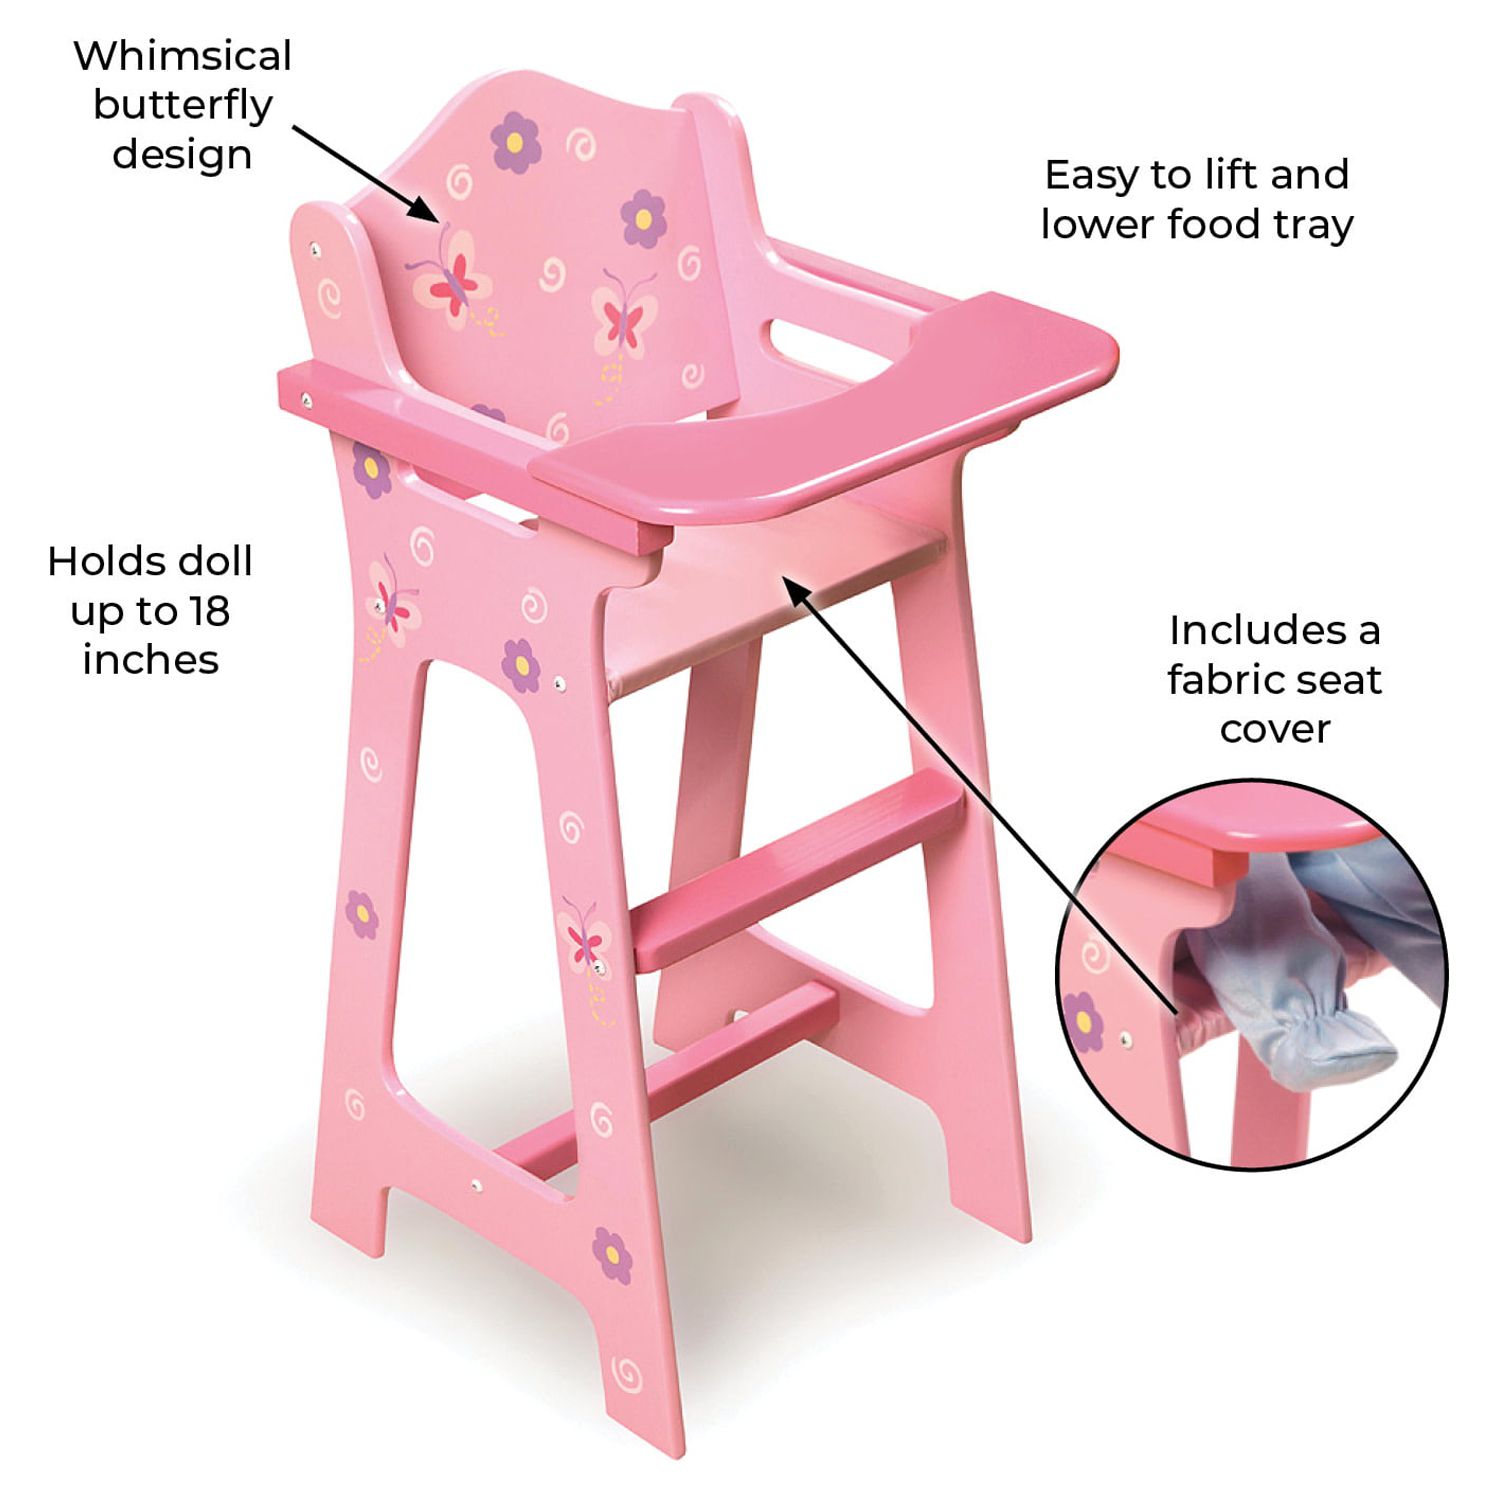 Badger Basket Blossoms and Butterflies Doll High Chair Feeding Seat for 18 inch Dolls - Pink - image 4 of 9